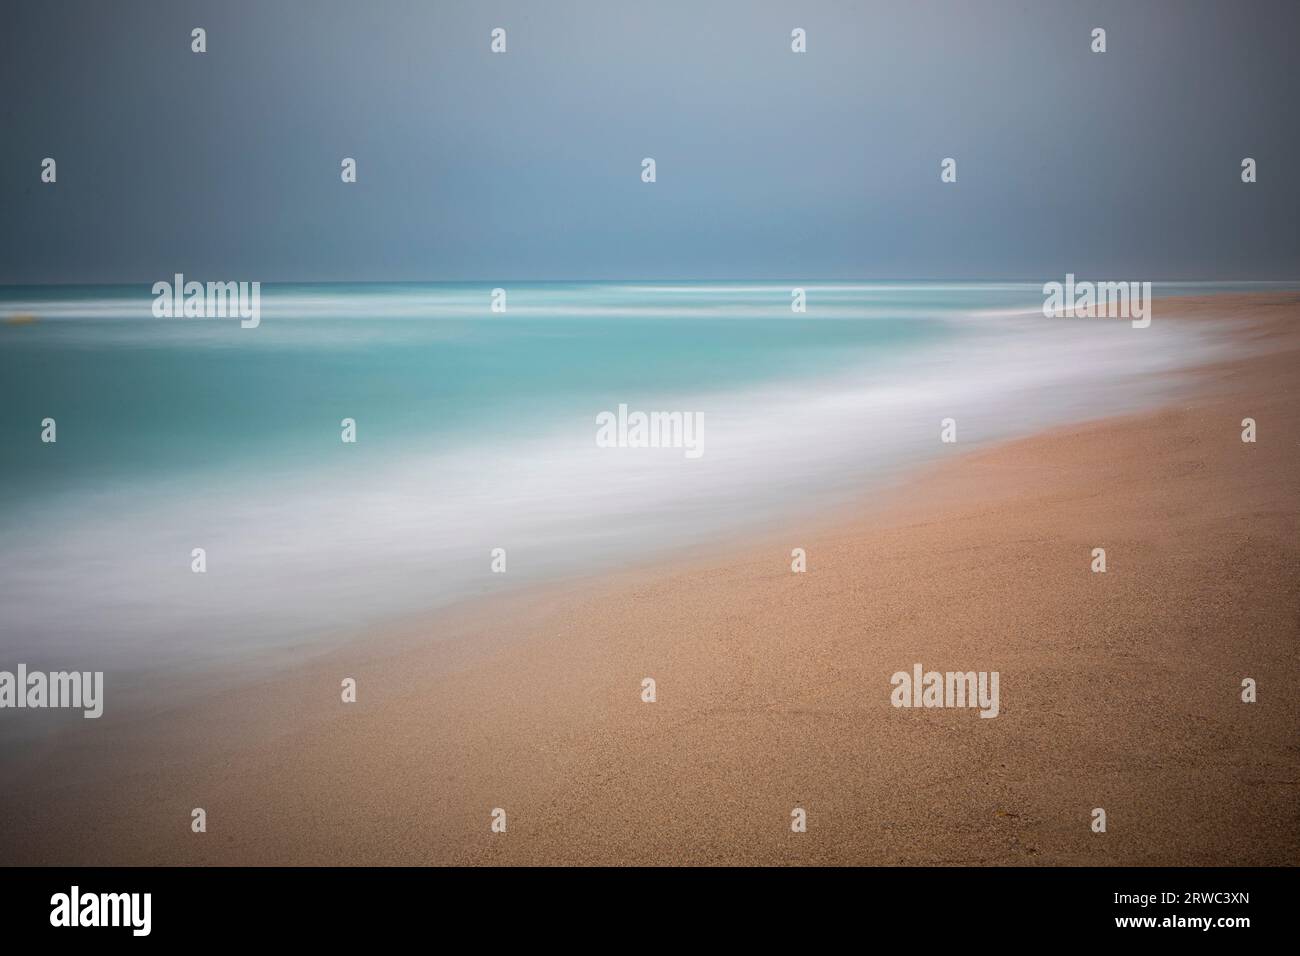 A long exposure shot of the Mediterranean sea on a windy day Stock Photo